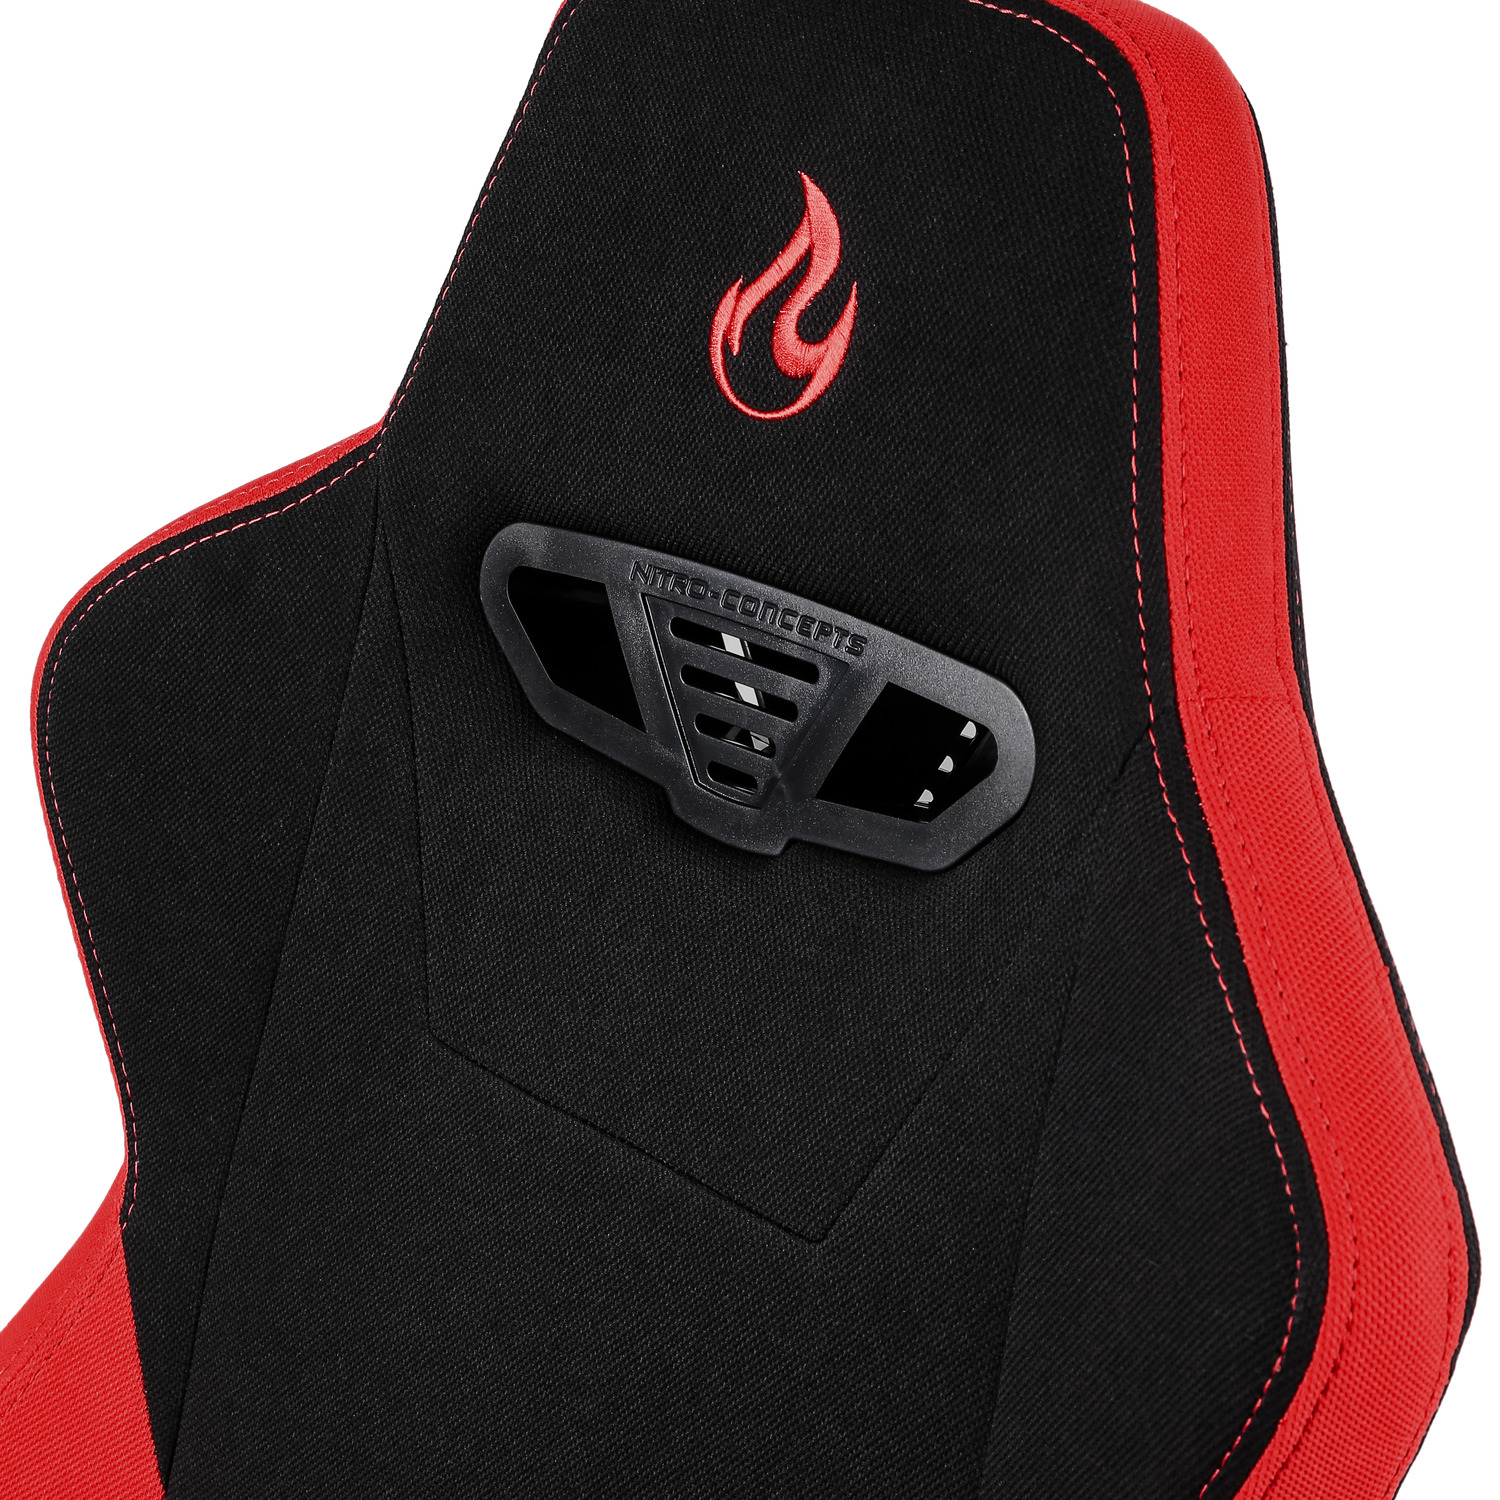 nitro-concepts - Fauteuil gaming S300 Inferno Red